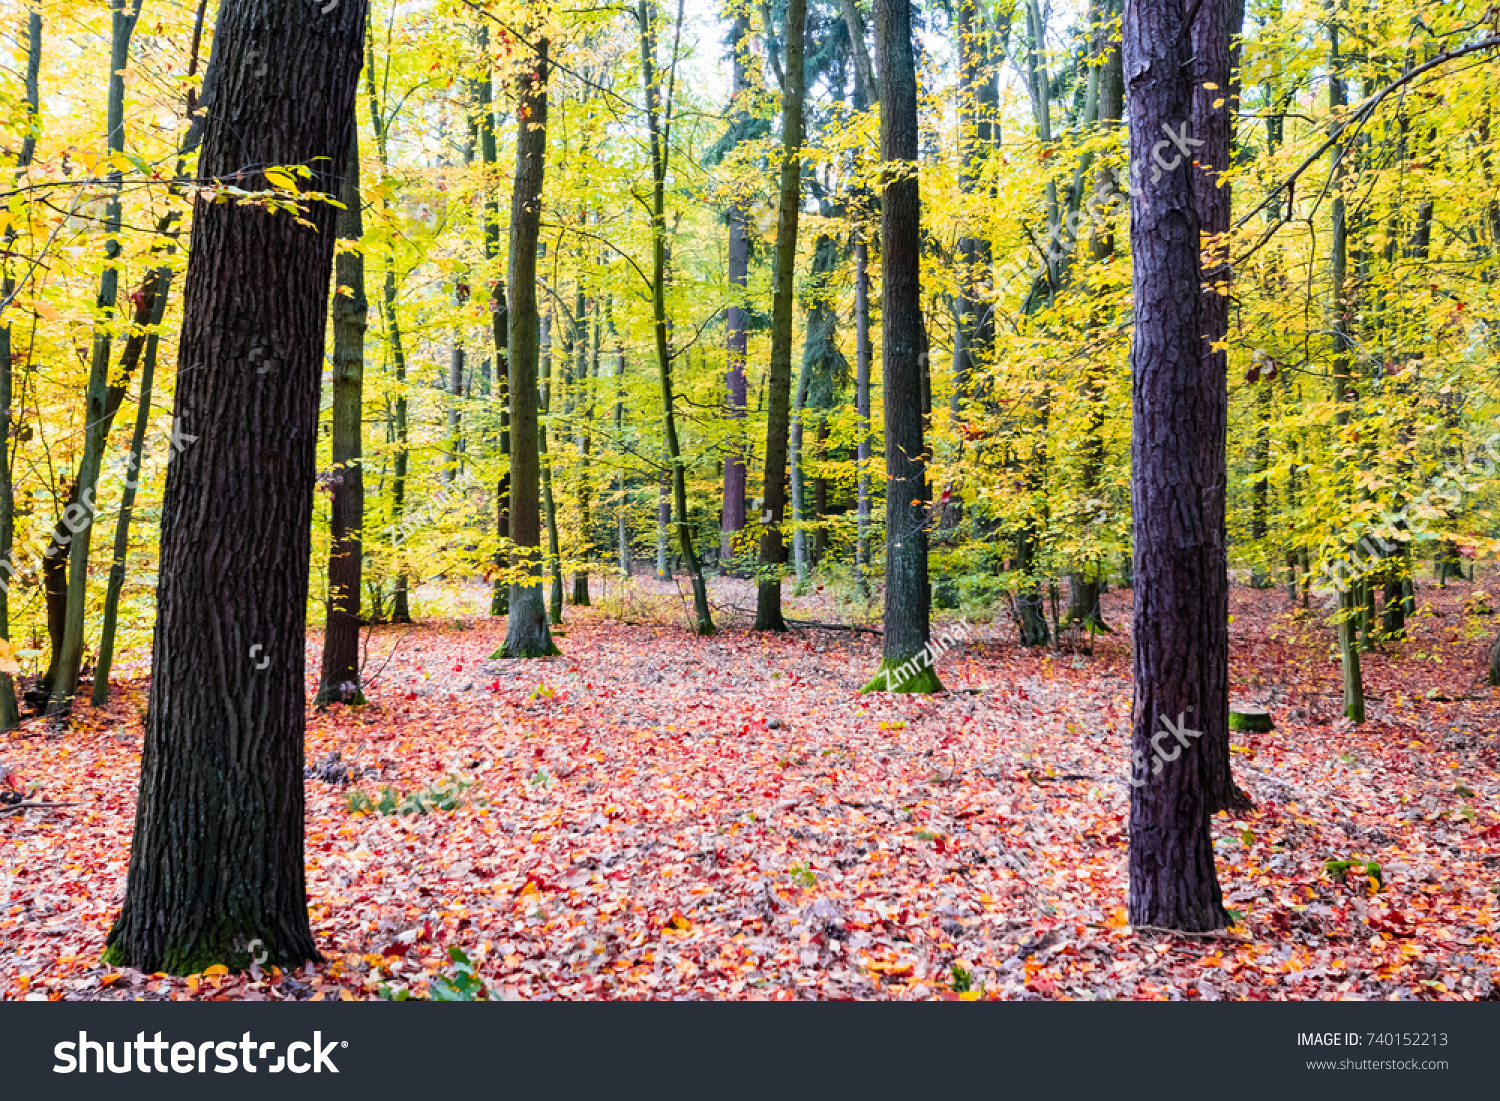 Beautiful forest in autumn, many vibrant colors around, leaves on the ground, big trees. Wide angle shot. #740152213